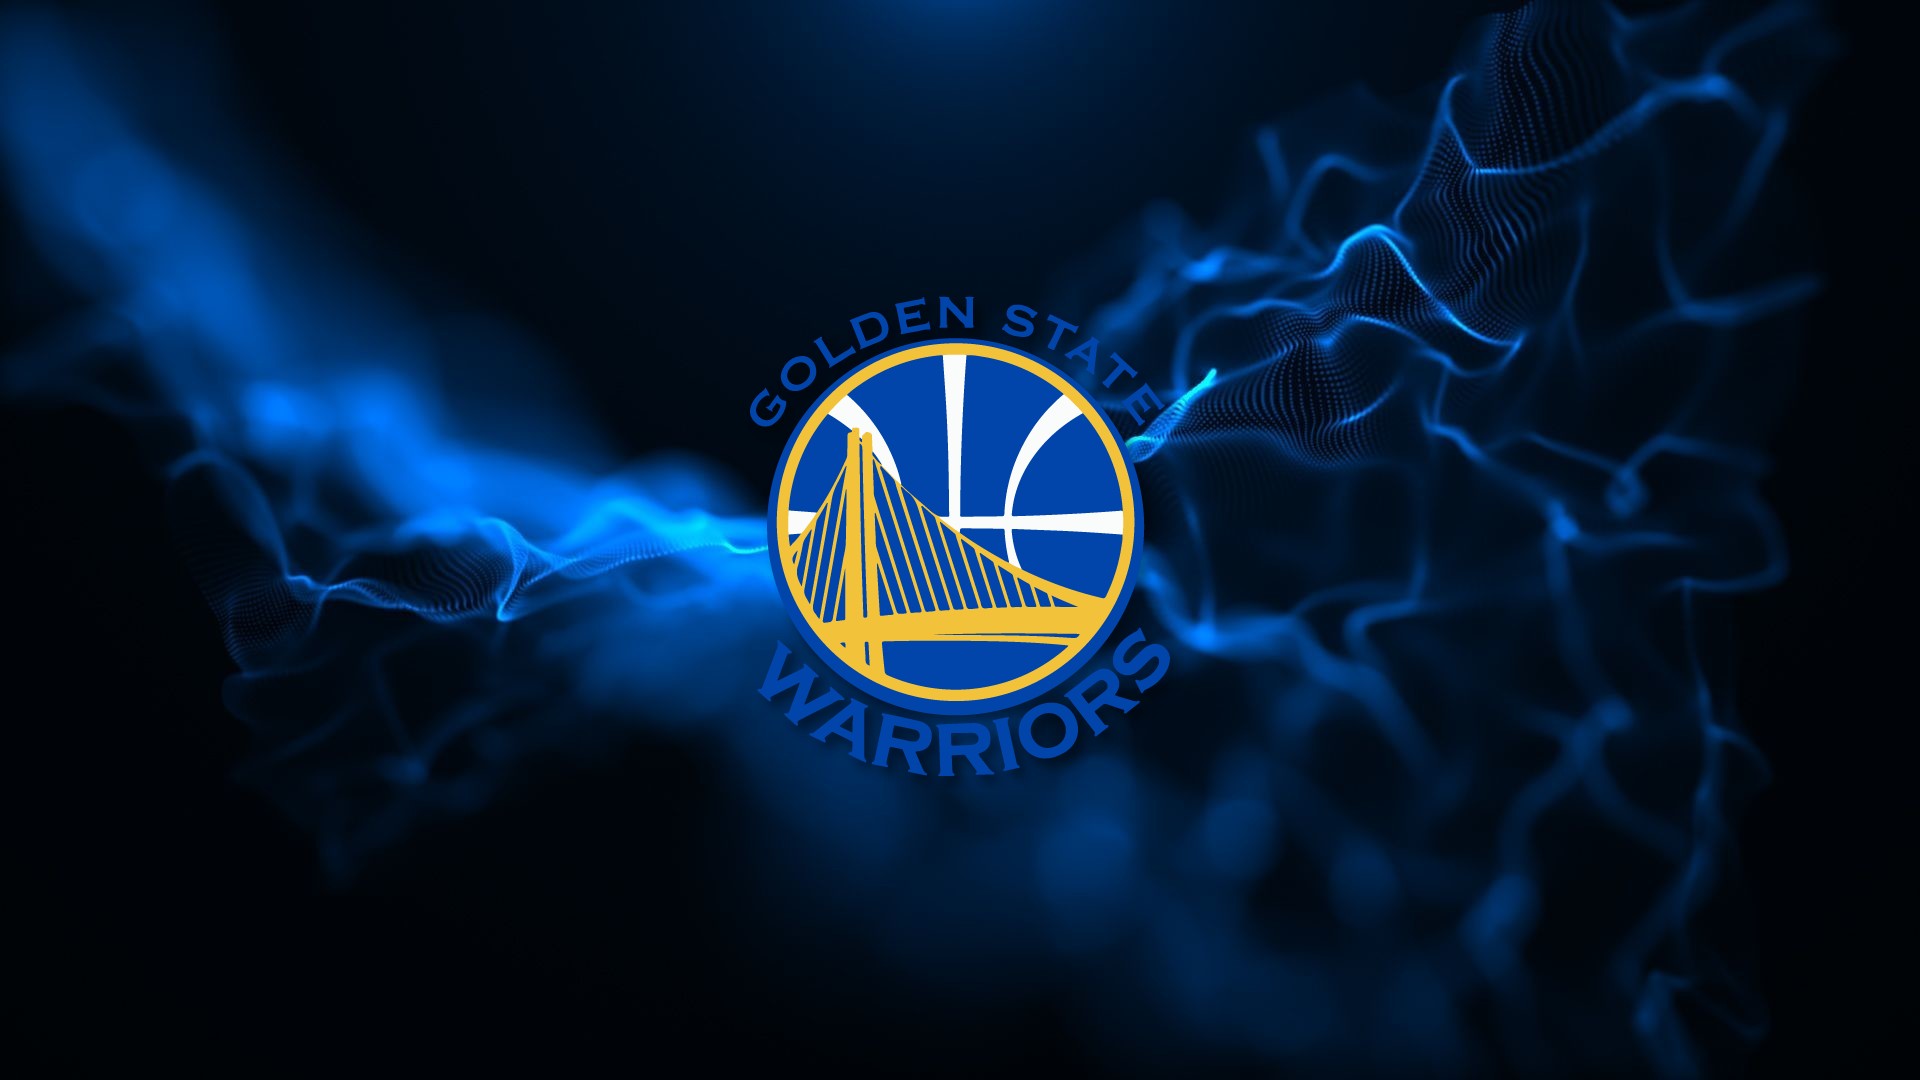 Golden State Warriors Wallpaper with image resolution 1920x1080 pixel. You can use this wallpaper as background for your desktop Computer Screensavers, Android or iPhone smartphones